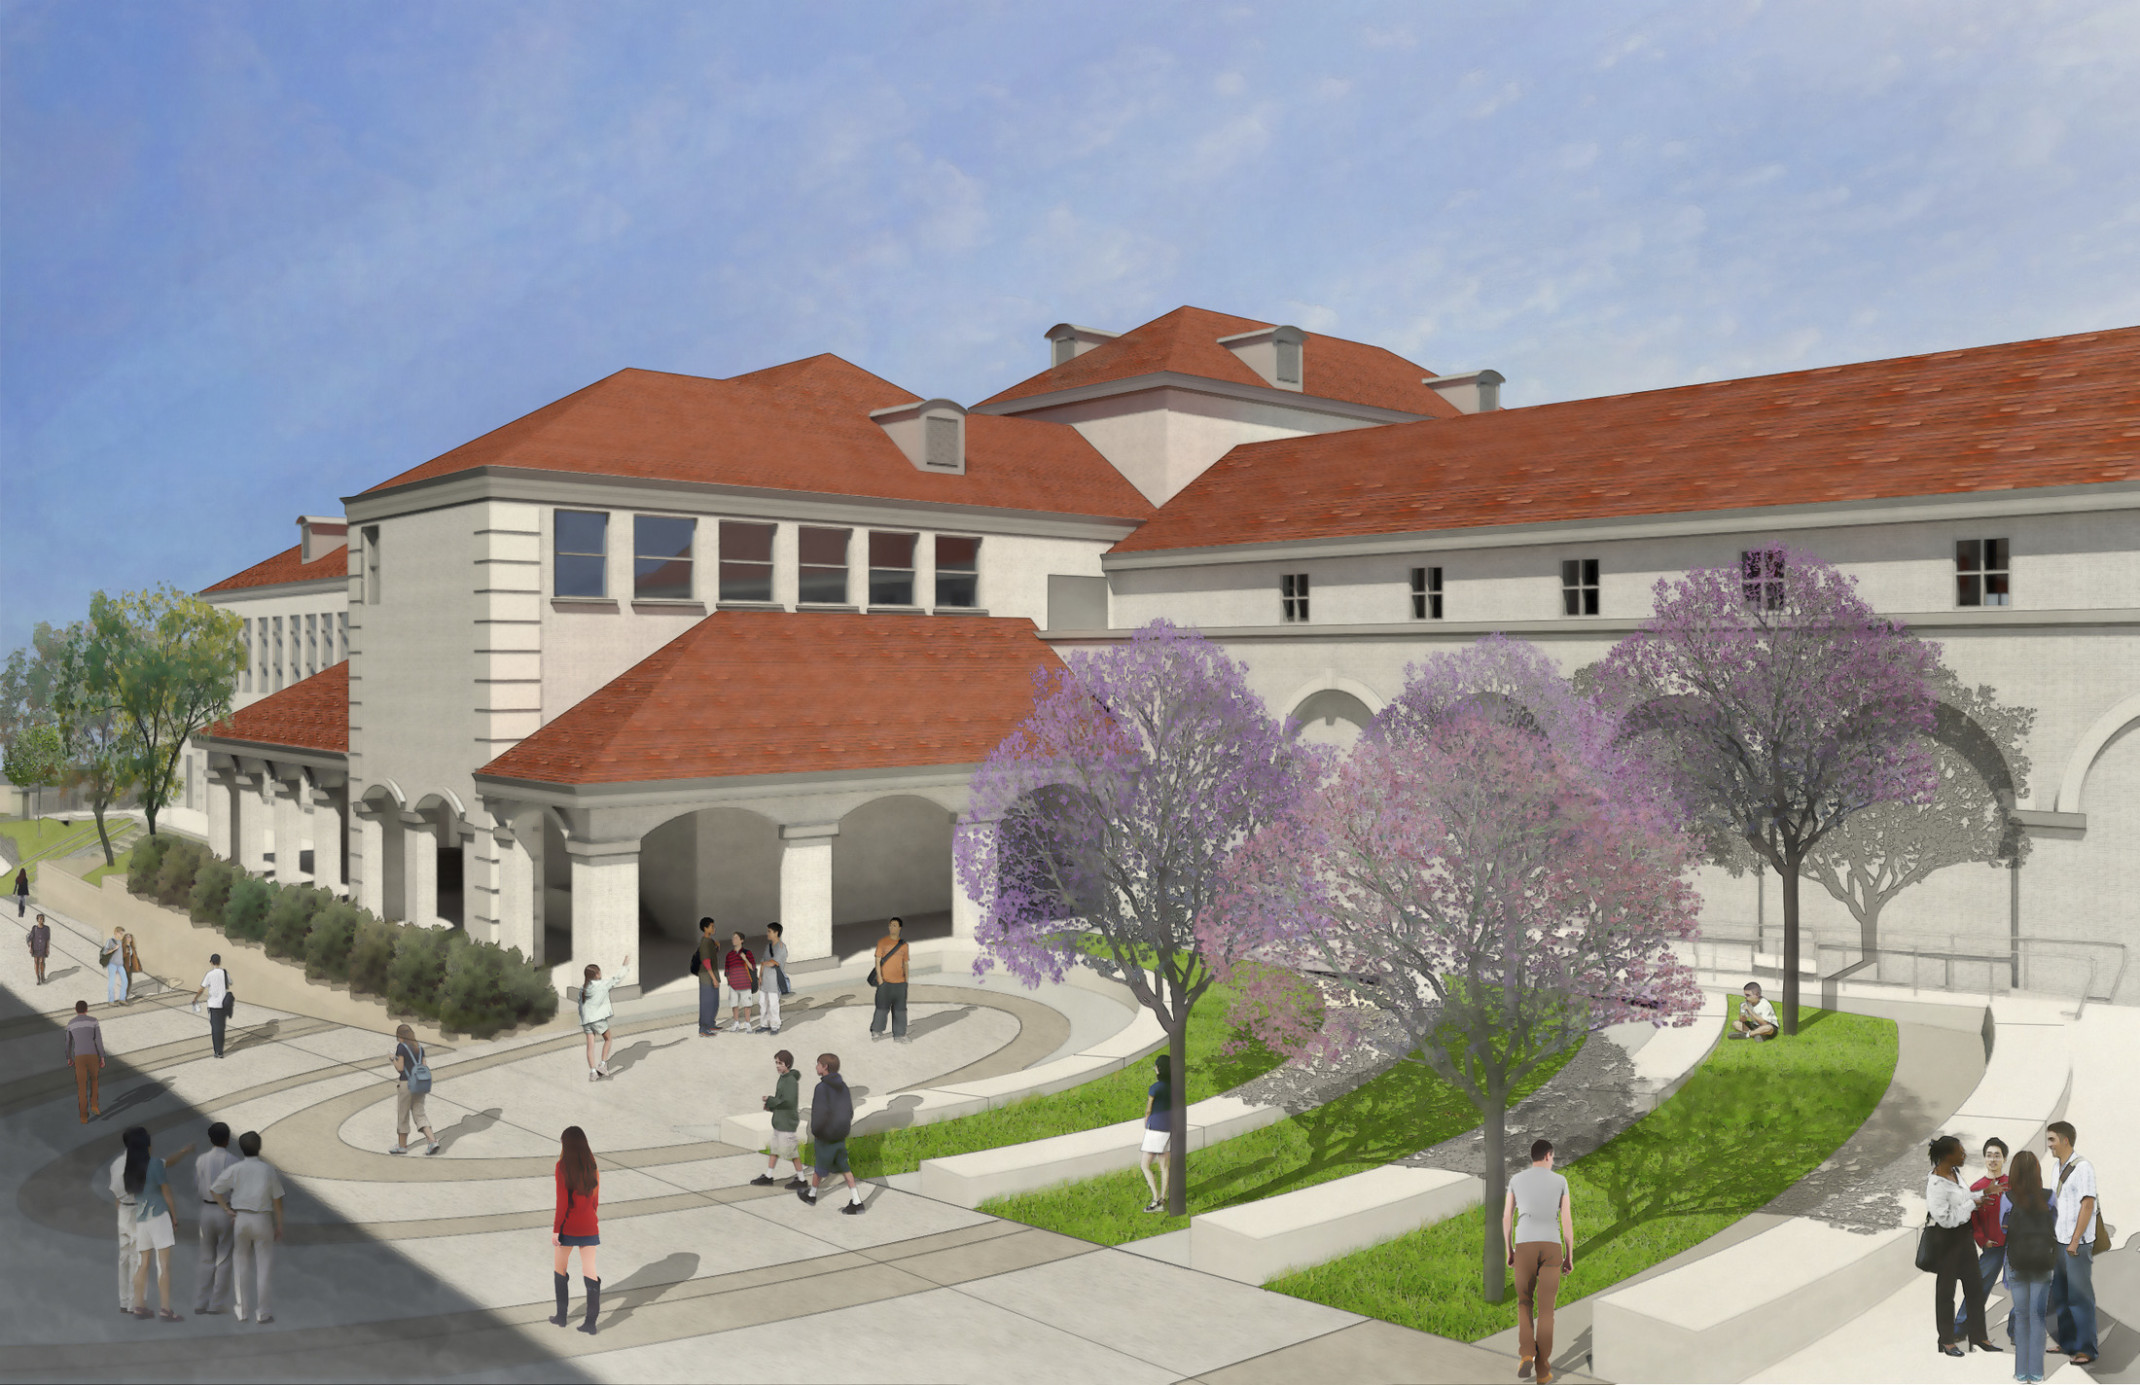 Beverly Hills High School entrance rendering. A white building with red Spanish style roof. Archways line walls, a round path